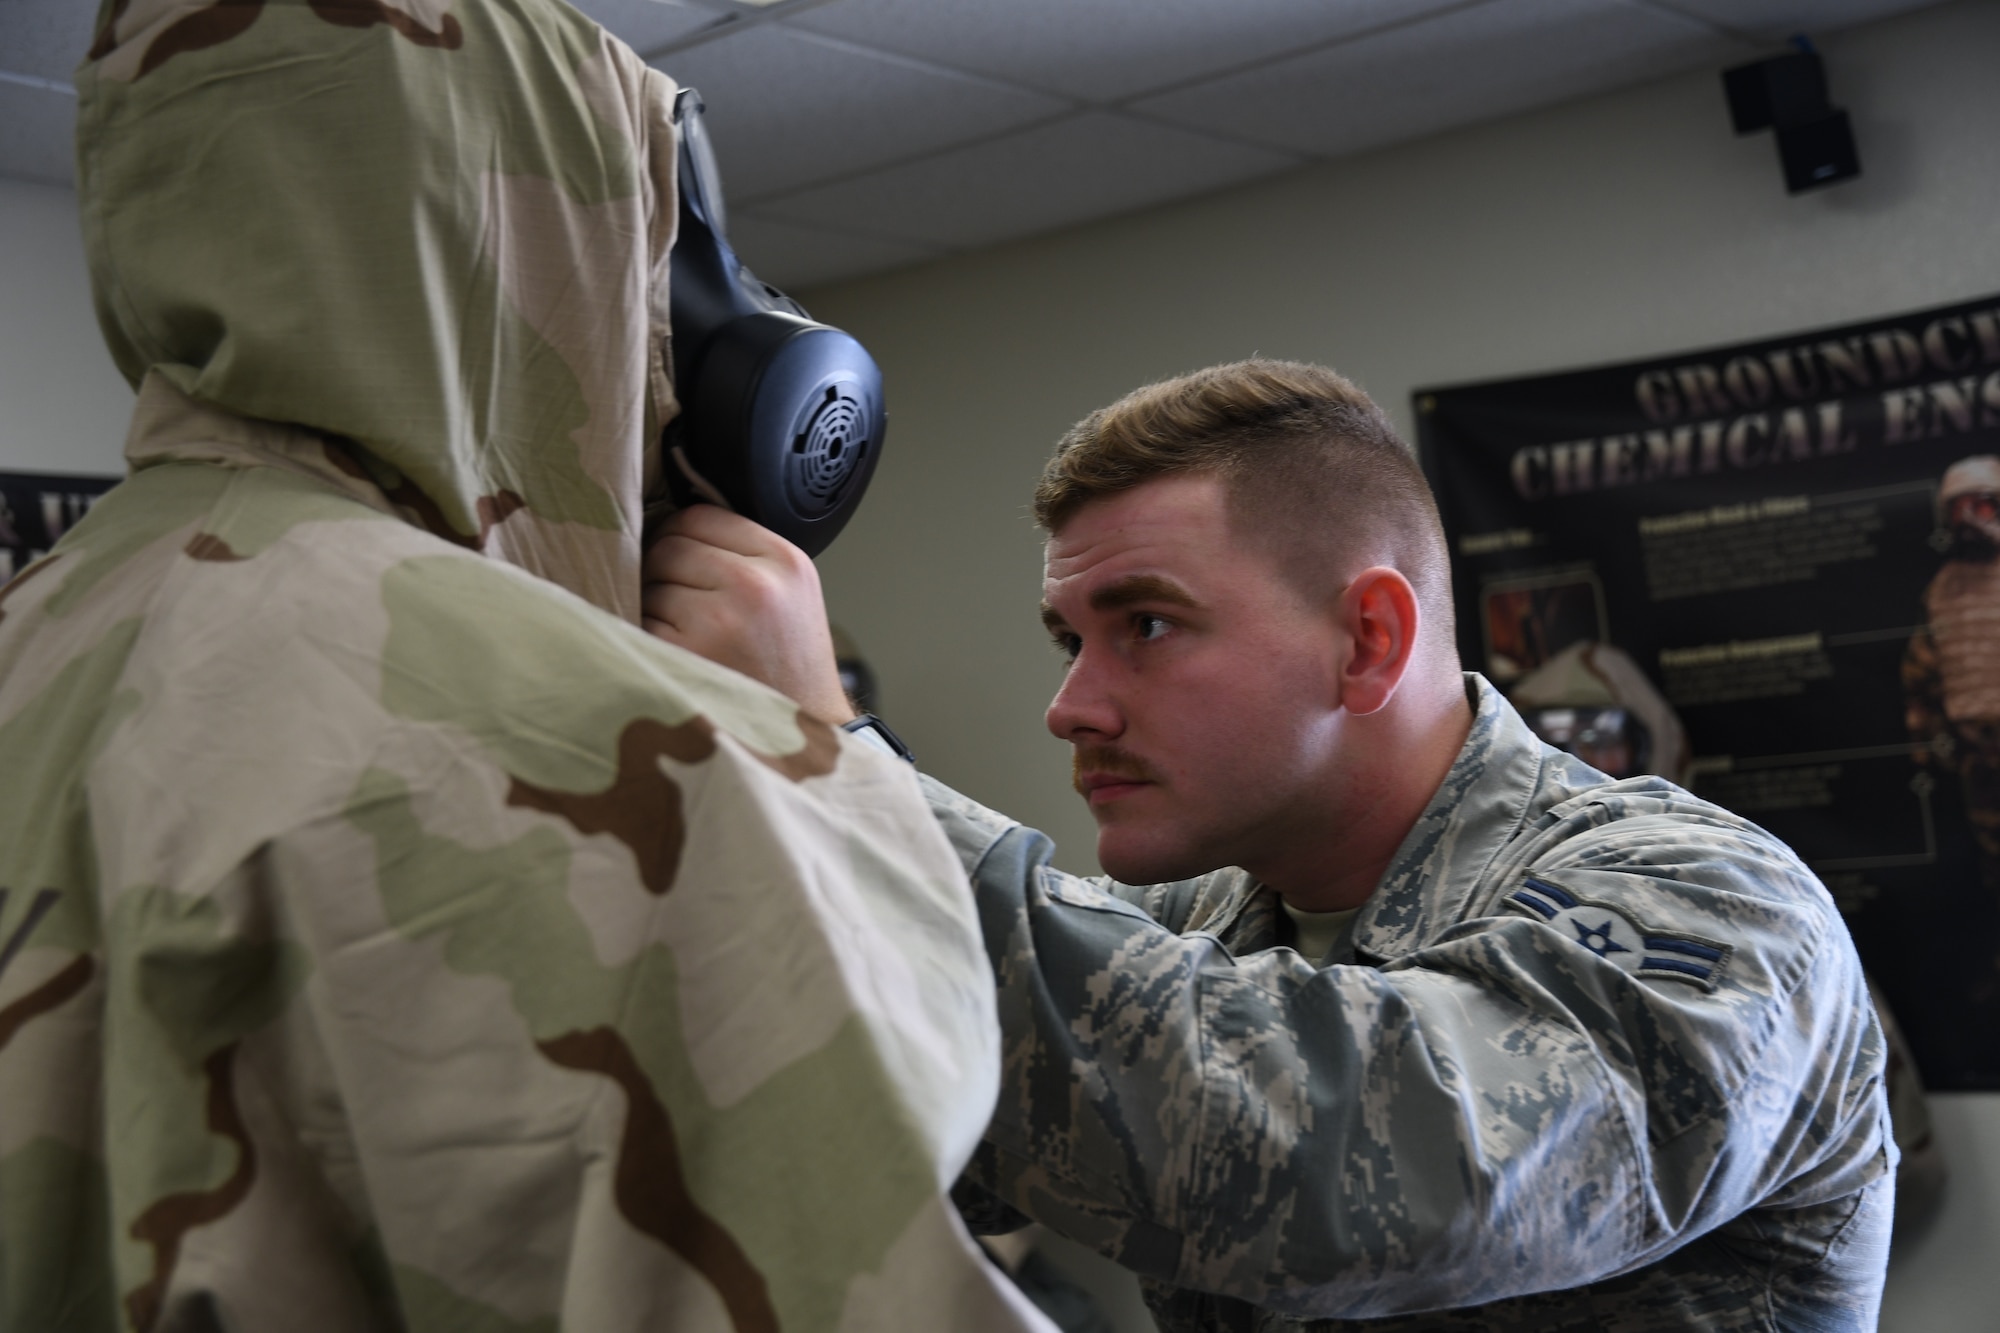 Staying current in CBRN training ensures D-M Airman maintain the skills needed to continue the mission in any contested and austere location around the world.